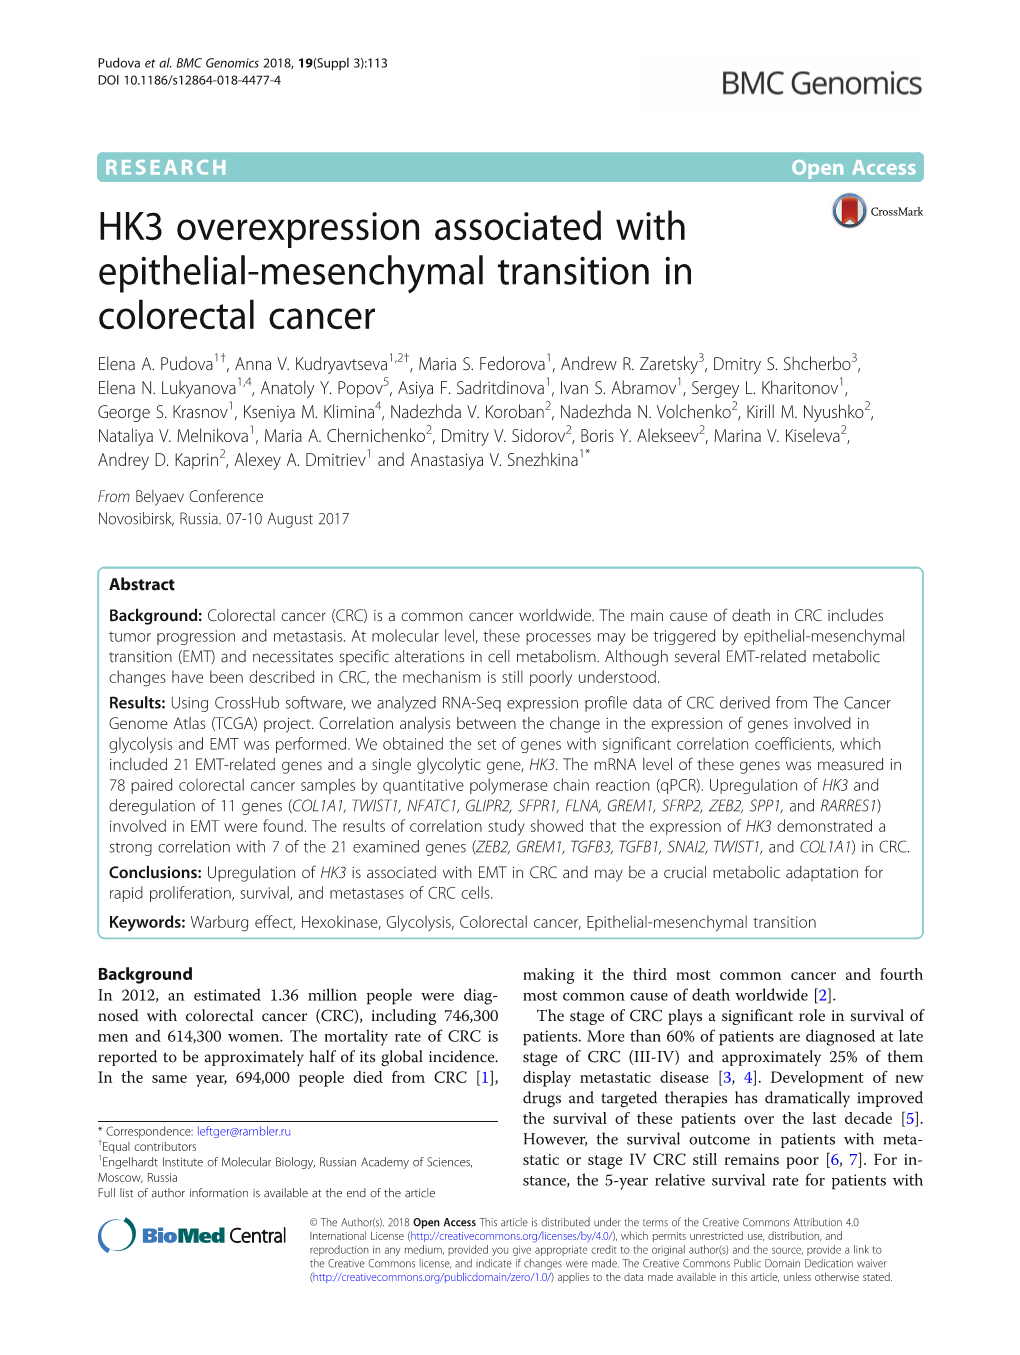 HK3 Overexpression Associated with Epithelial-Mesenchymal Transition in Colorectal Cancer Elena A